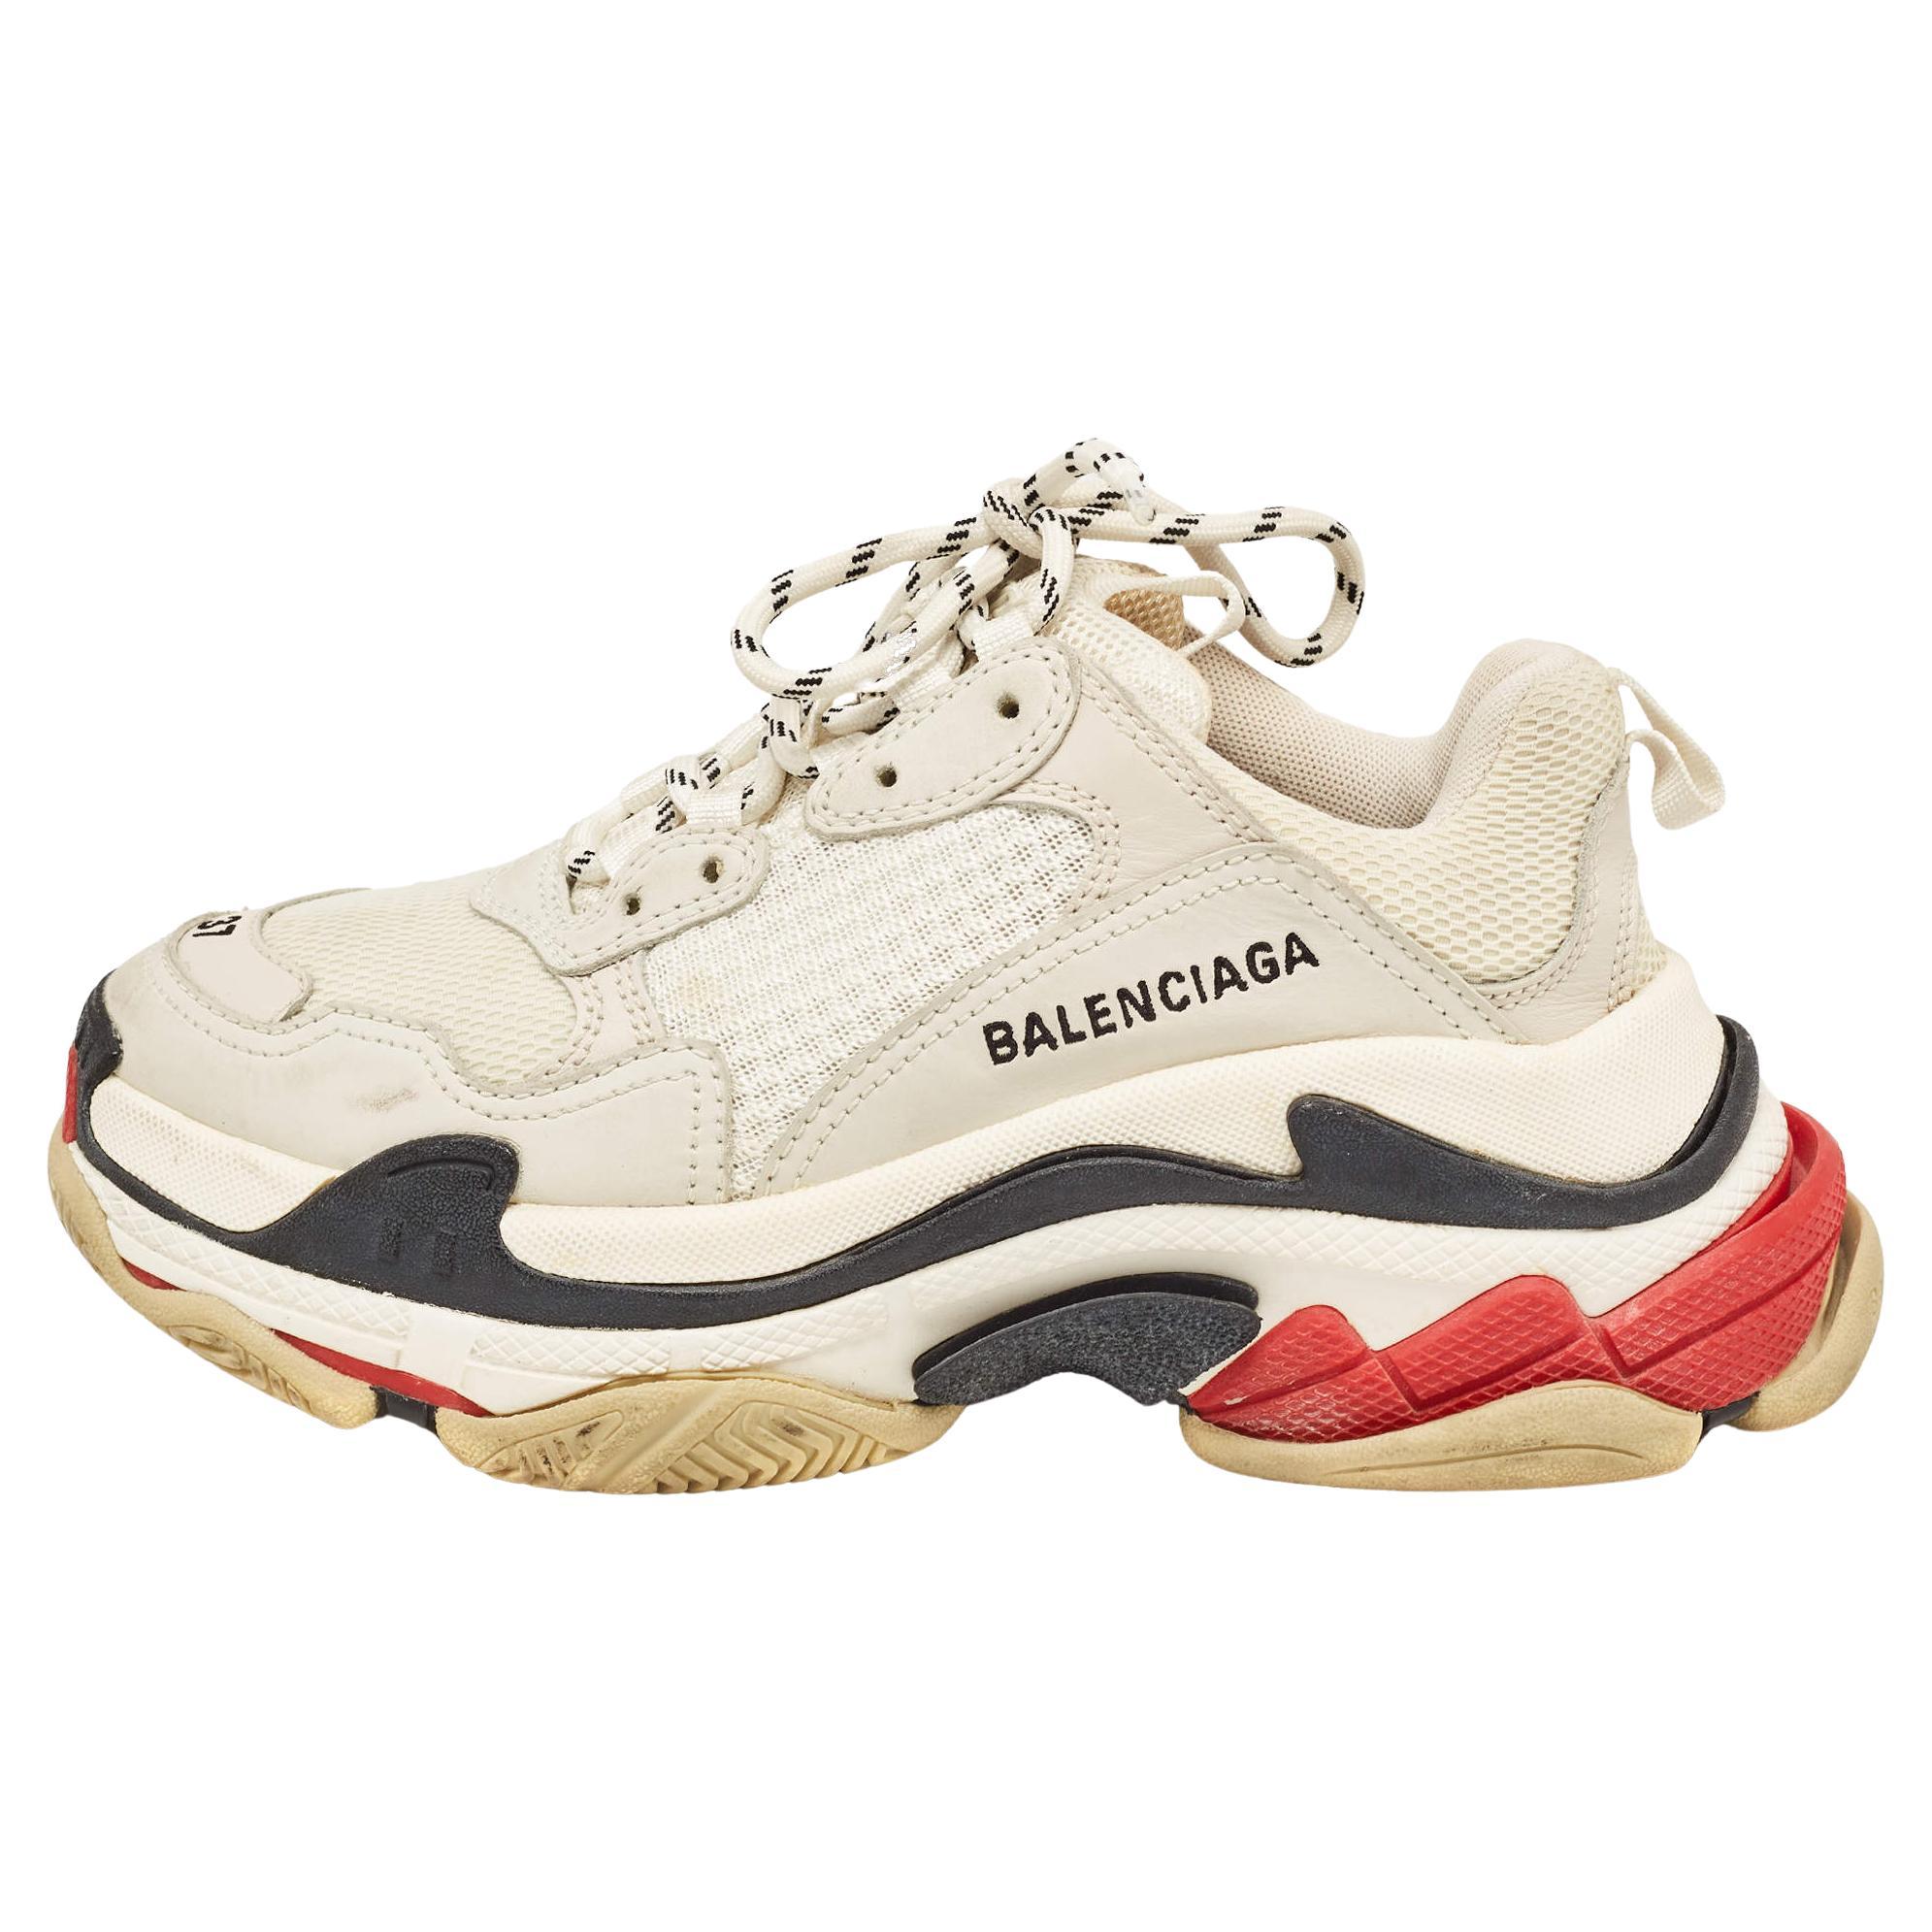 Balenciaga Multicolor Mesh and Nubuck Leather Triple S Low Top Sneakers Size 37 For Sale